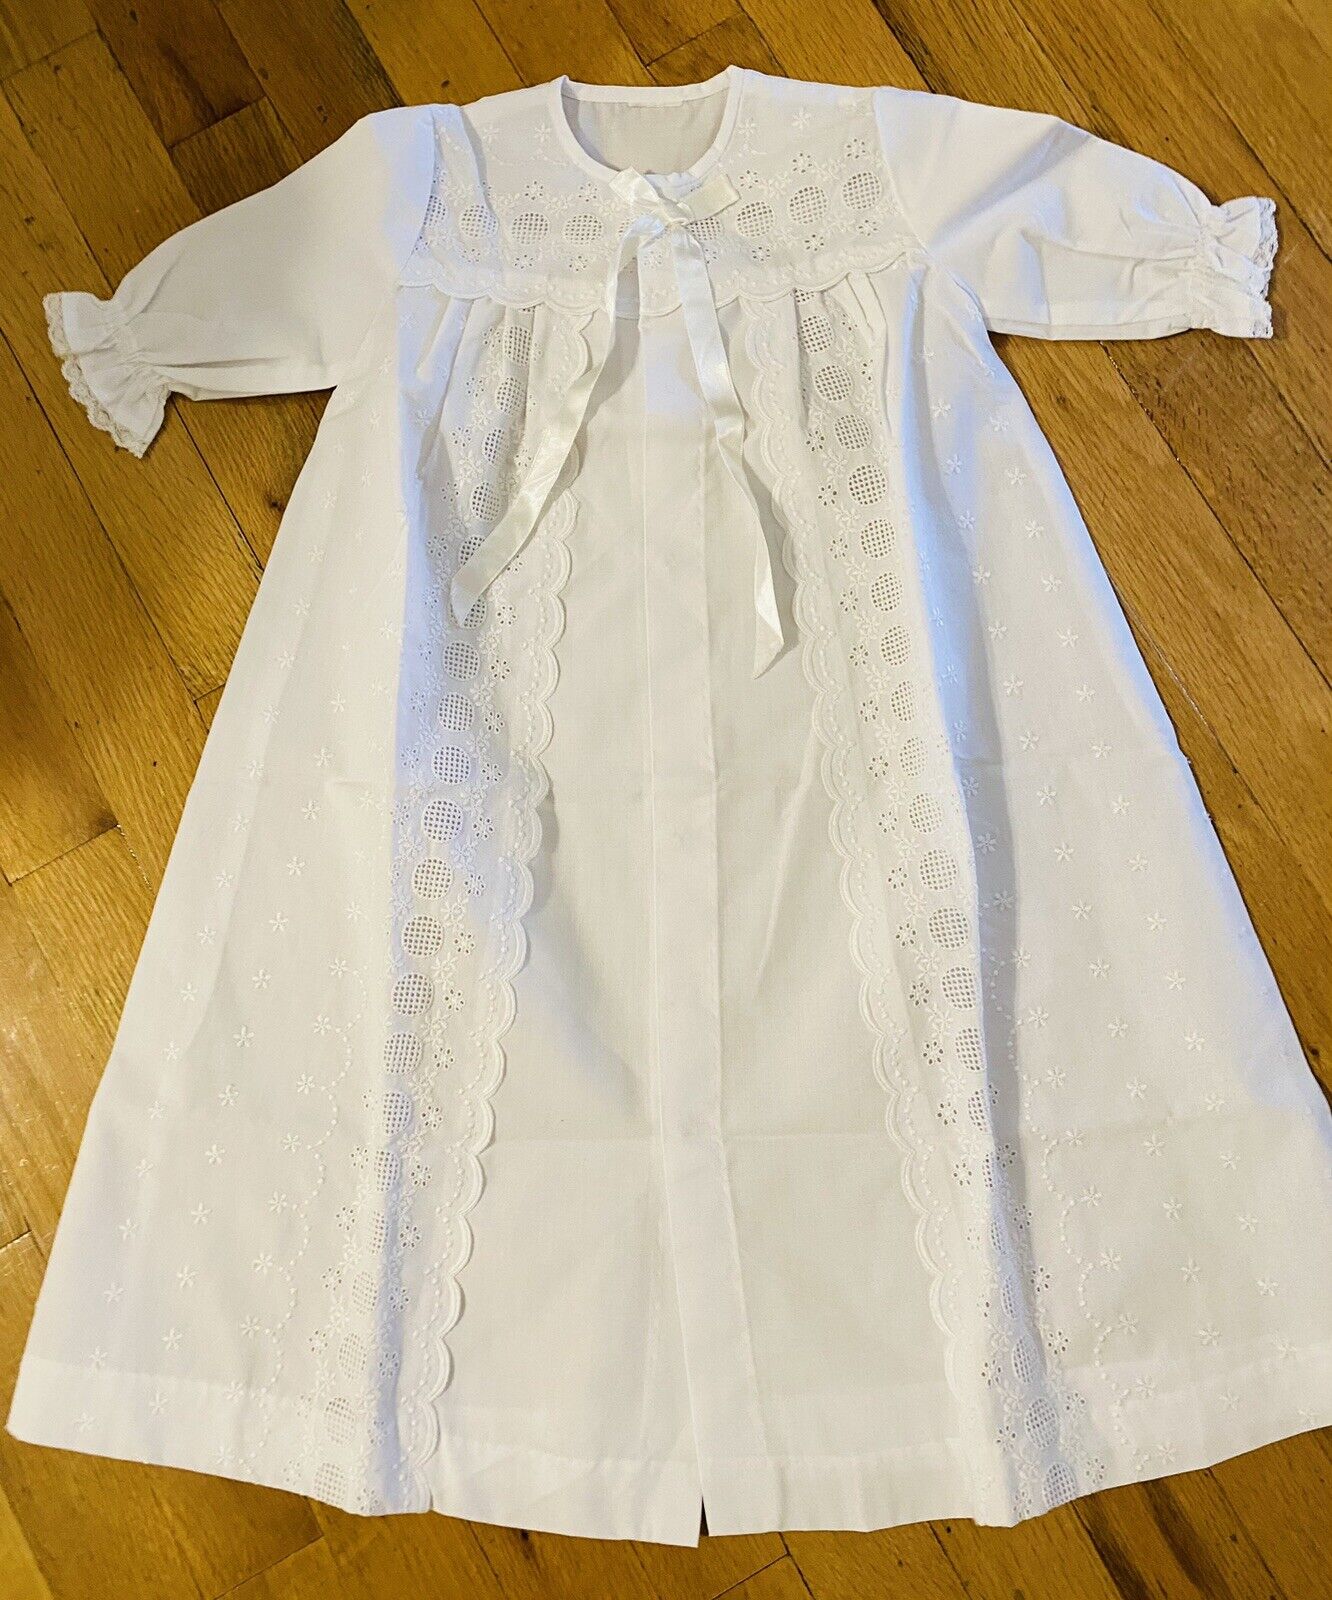 Toddler Girls White Christening Gown NWOT See Measurements